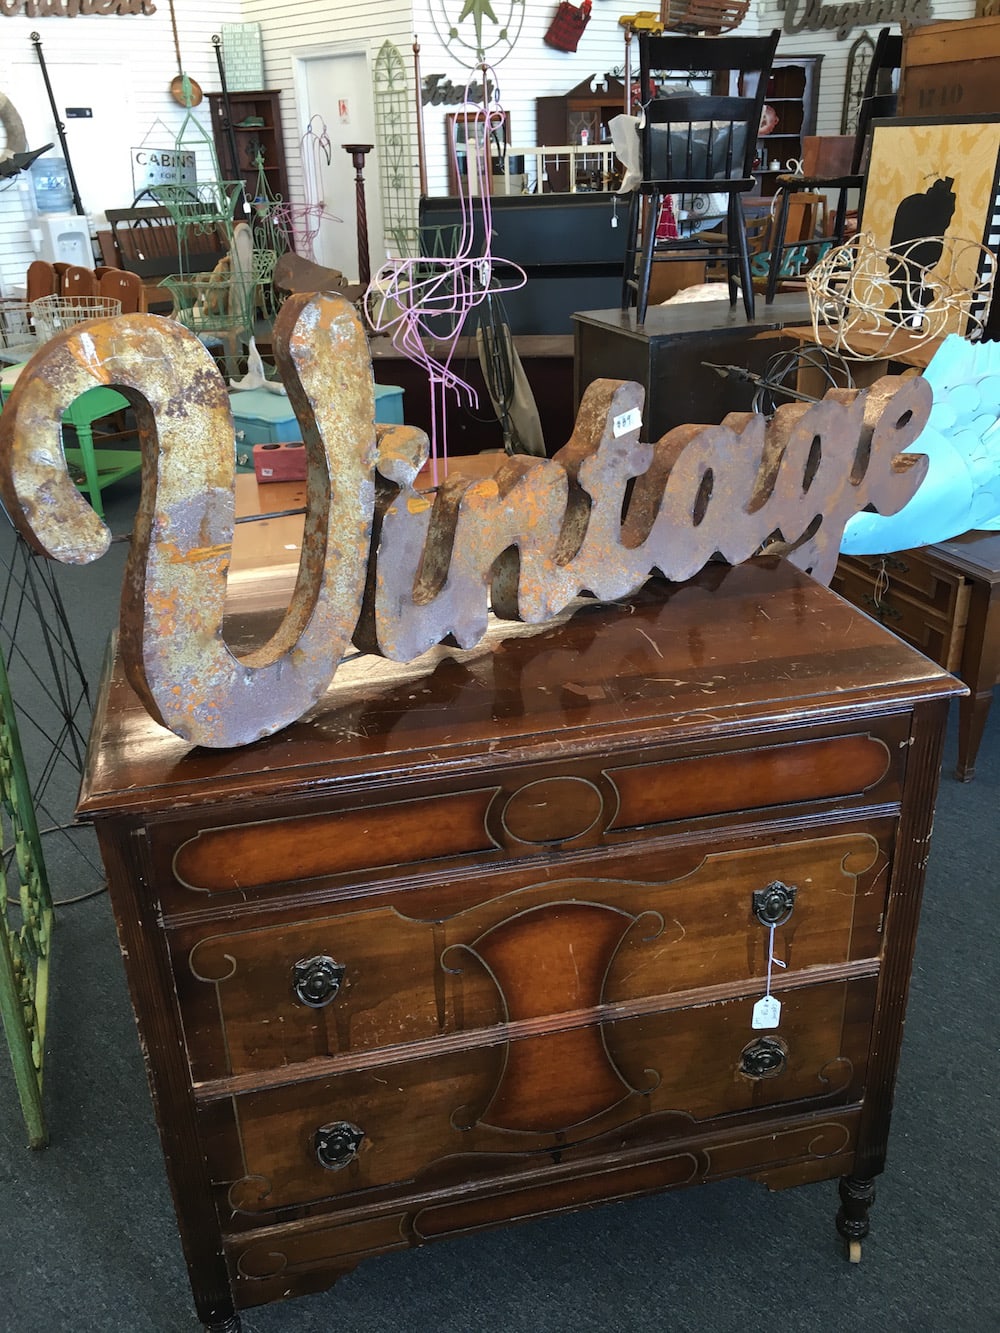 The Best Vintage Shop in North Carolina: Class and Trash Review